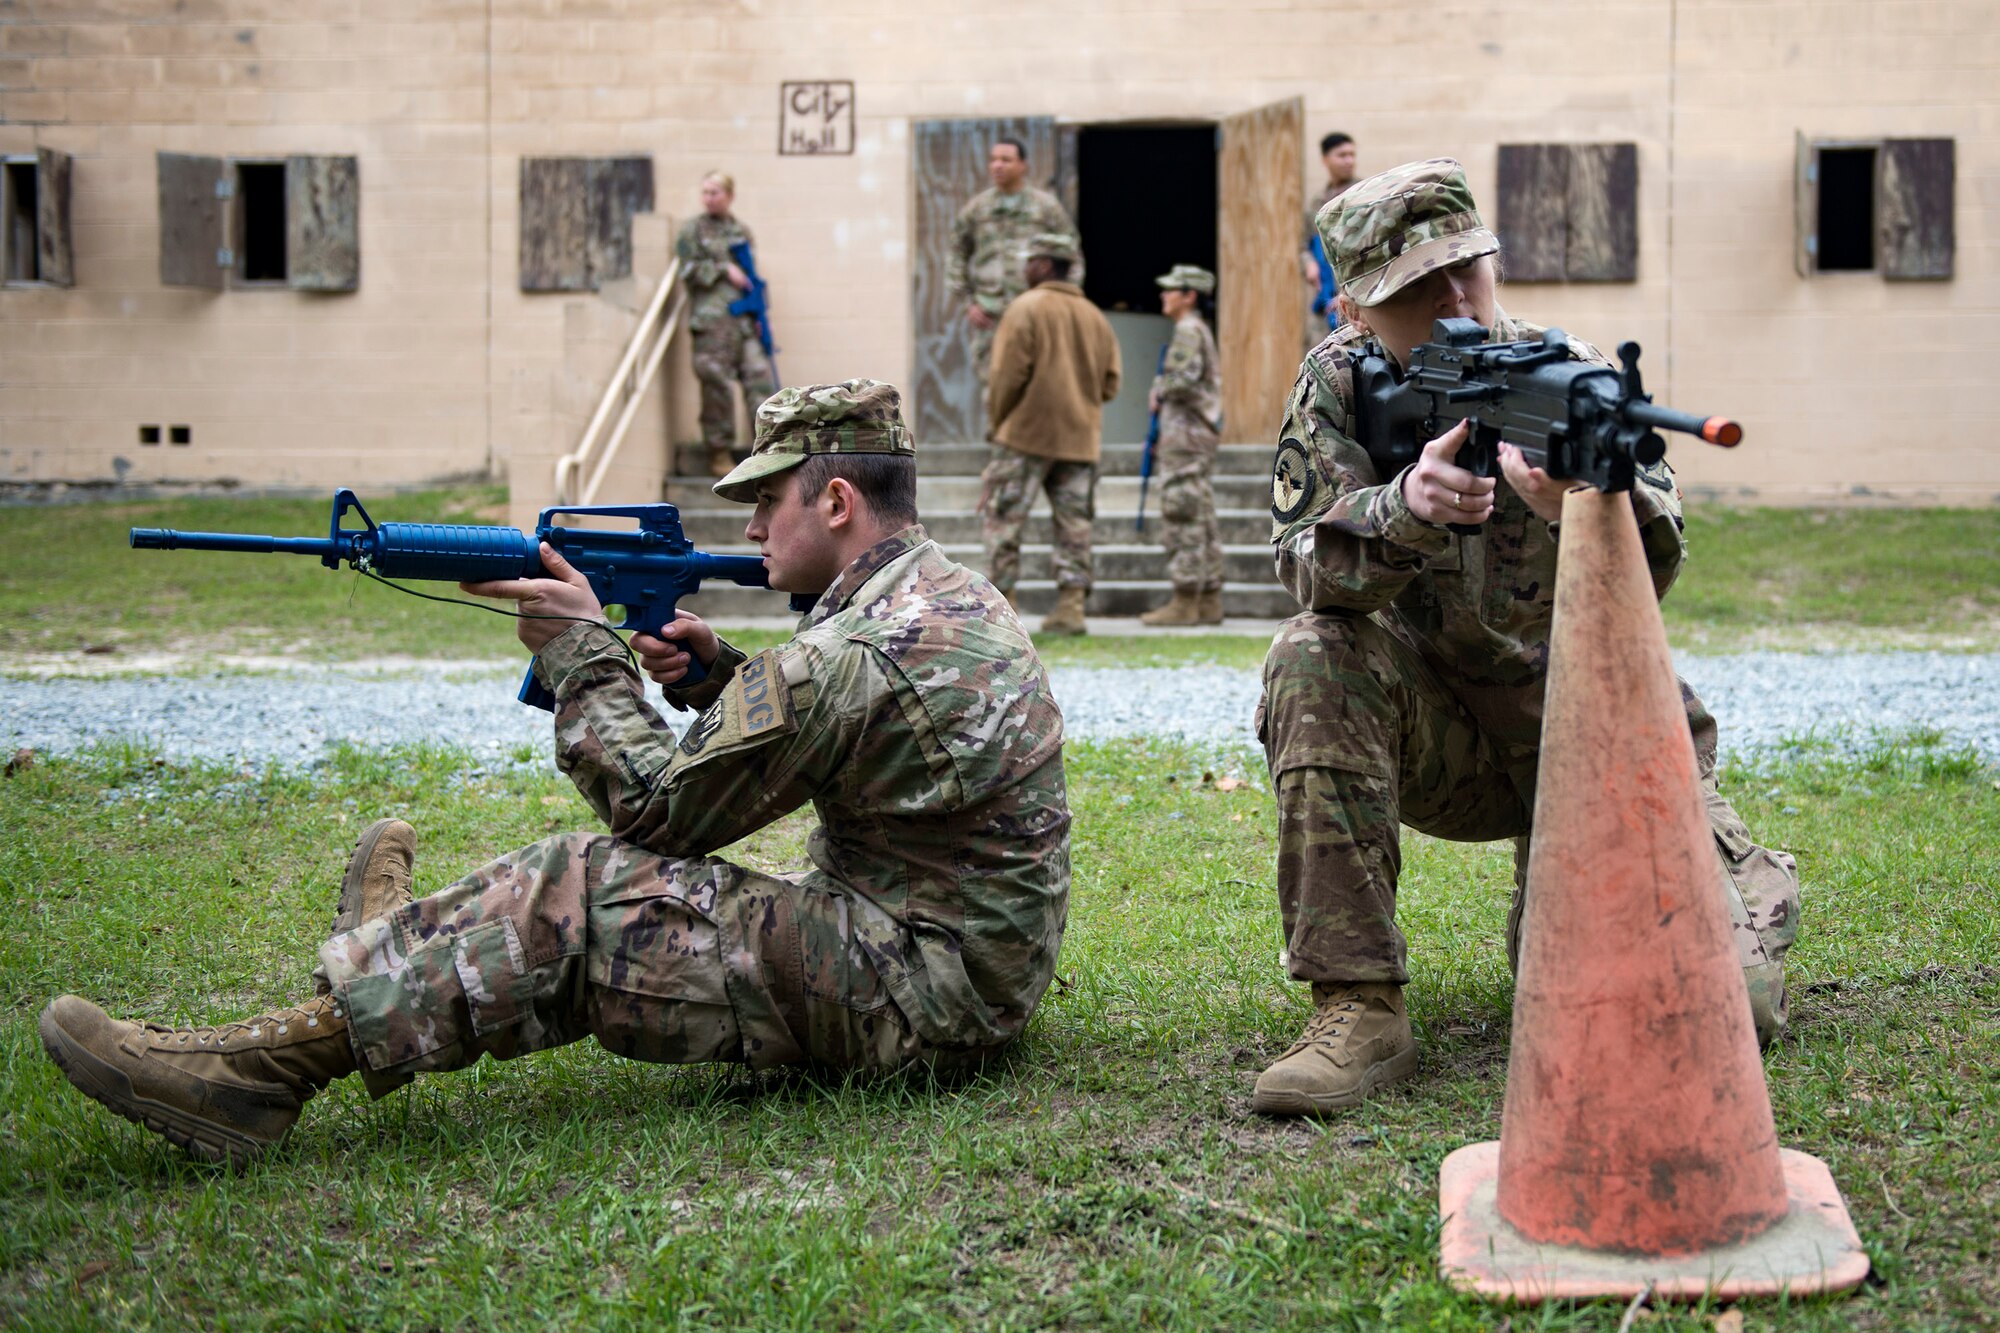 Airman 1st Class Loren Steed, right, and Airman Robert Ward, 824th Base Defense Squadron fire team members, set up perimeter defense during dismounted training operations, March 26, 2018, at Moody Air Force Base, Ga. The operations conducted were a part of the 820th Base Defense Group’s (BDG) Initial Qualification Training, which is given to new Airmen coming into the BDG as an opportunity to learn a baseline of basic combat skills that will be needed to successfully operate as a cohesive unit while in a deployed environment. (U.S. Air Force photo by Airman 1st Class Erick Requadt)